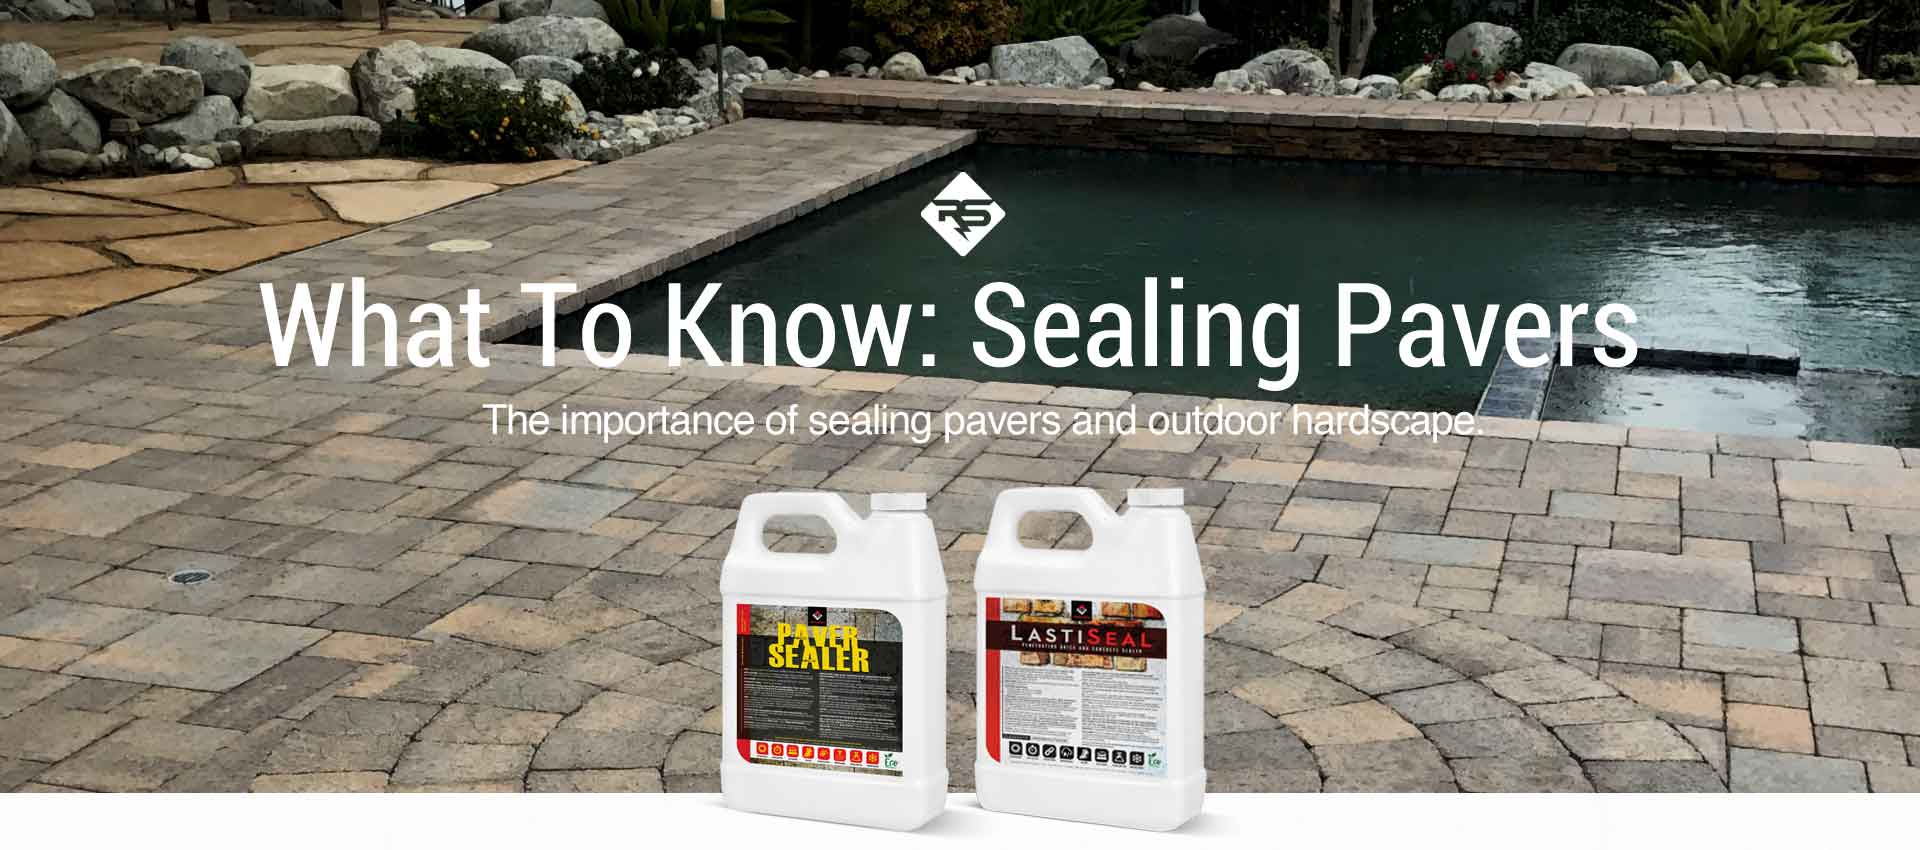 What To Know About Sealing Pavers